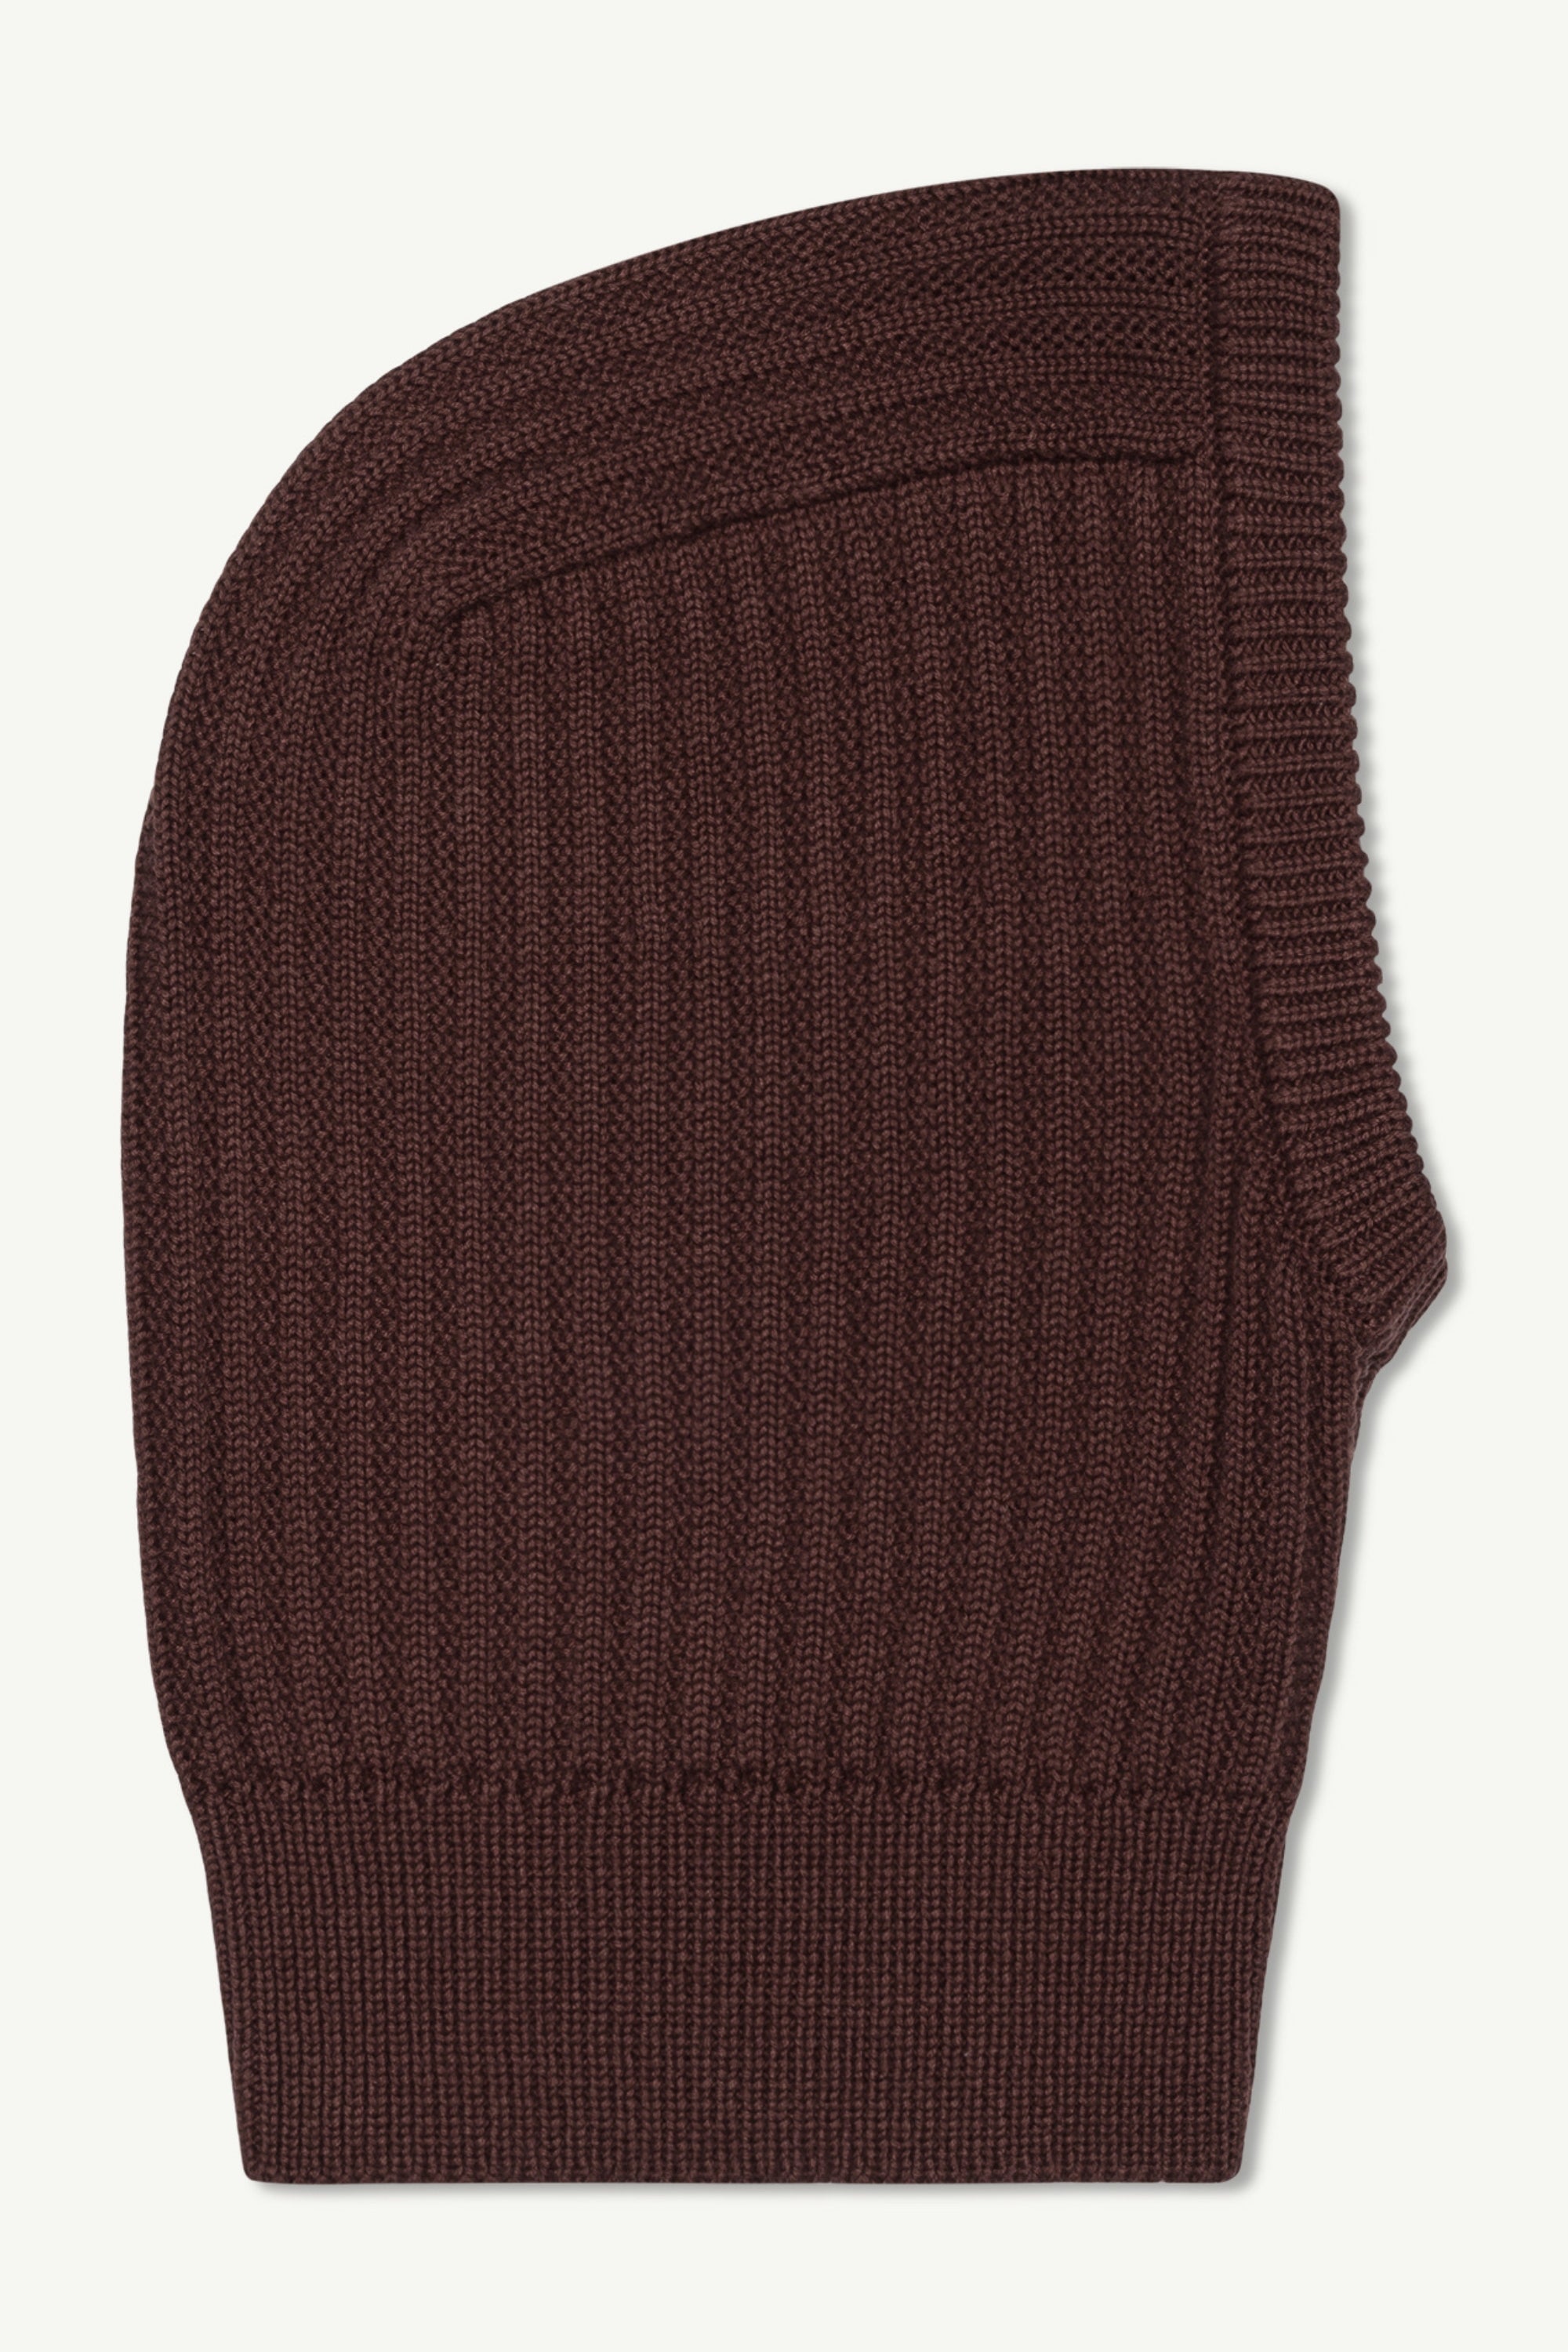 Knit Balaclava - Dark Brown Accessories Veiled Collection 